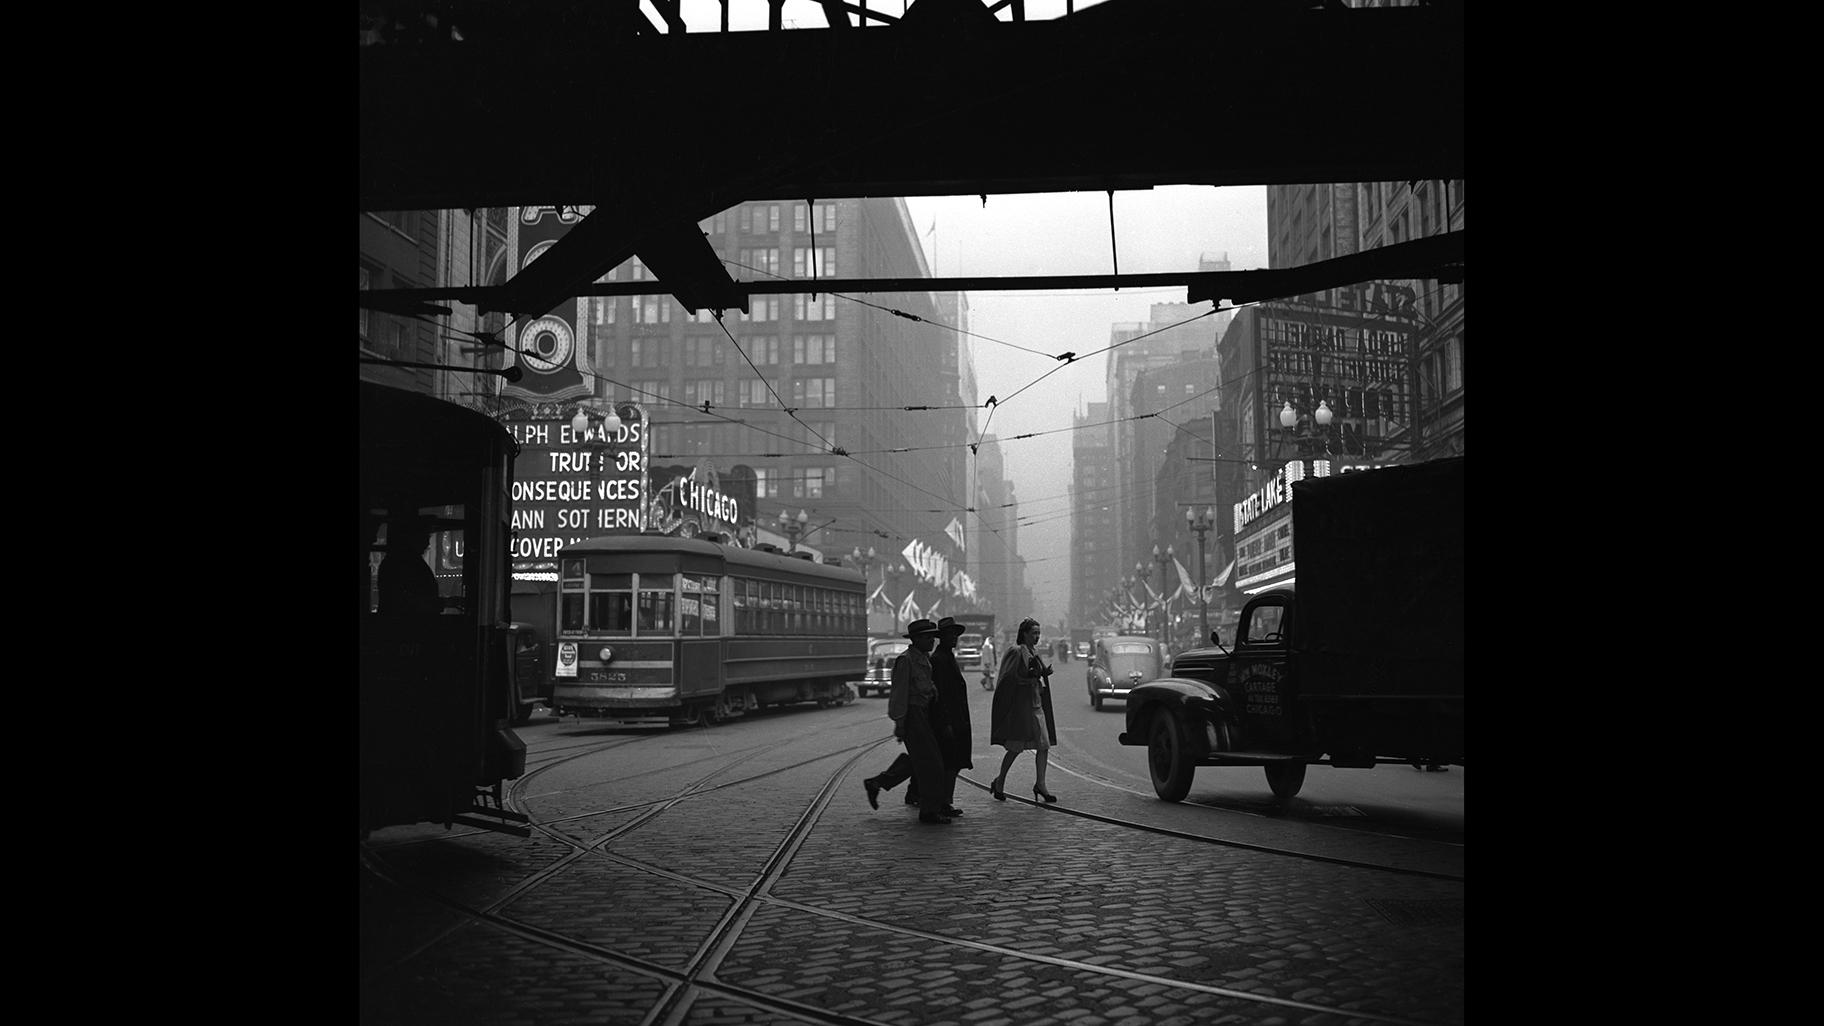 The Loop “during a dull day,” 1947. (Courtesy the Chicago History Museum)